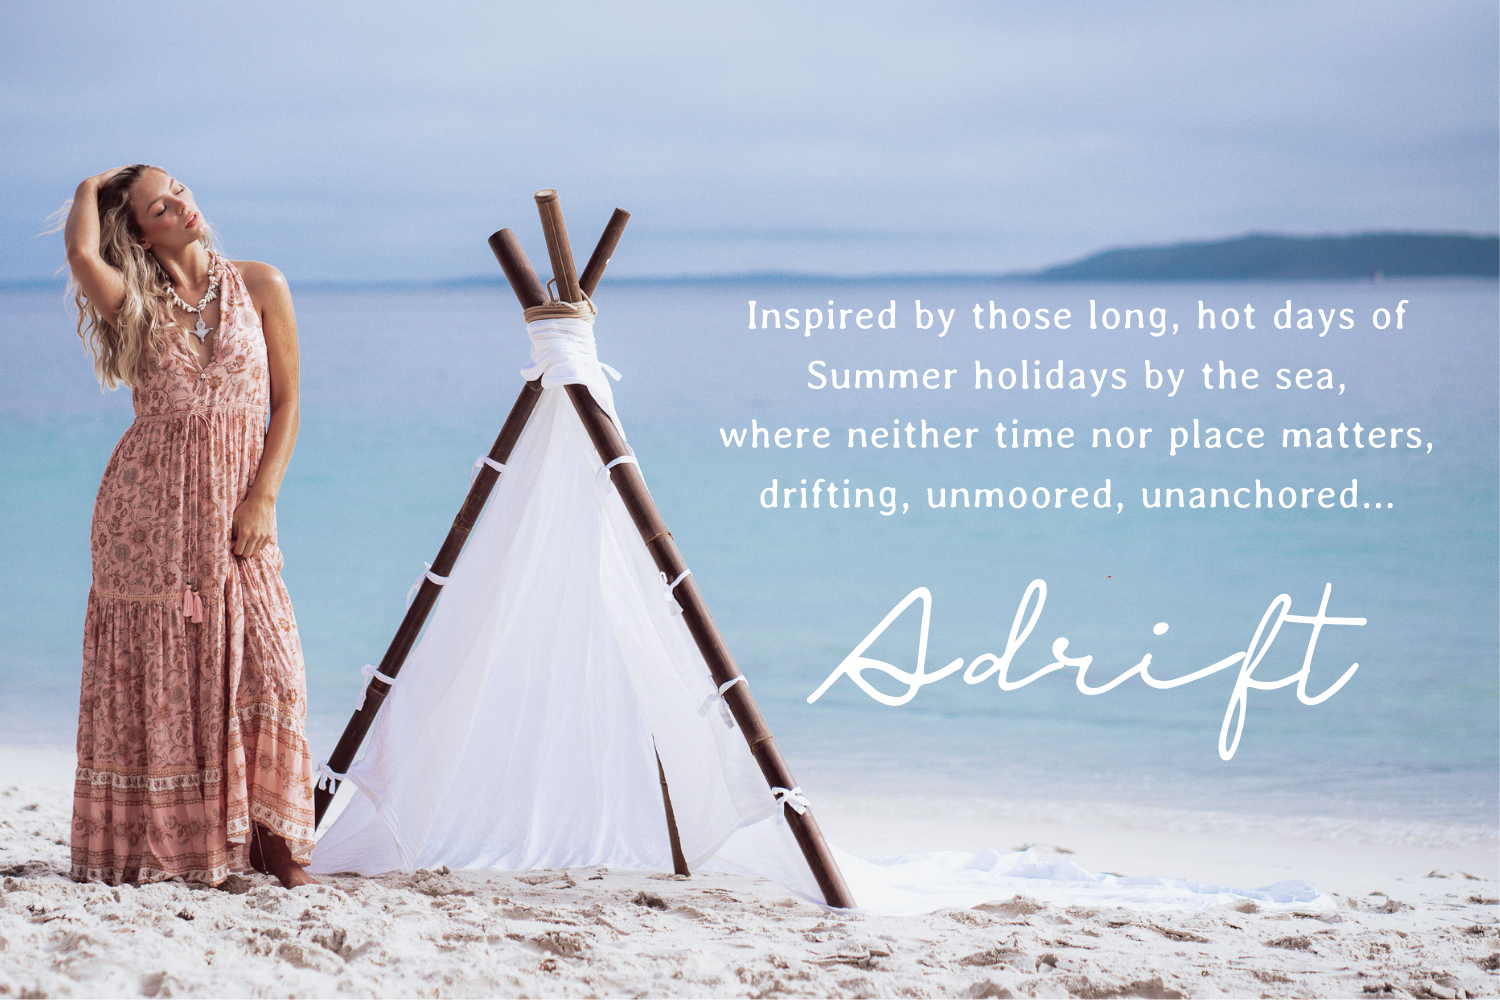 Get swept away by our latest collection, ADRIFT 🐚